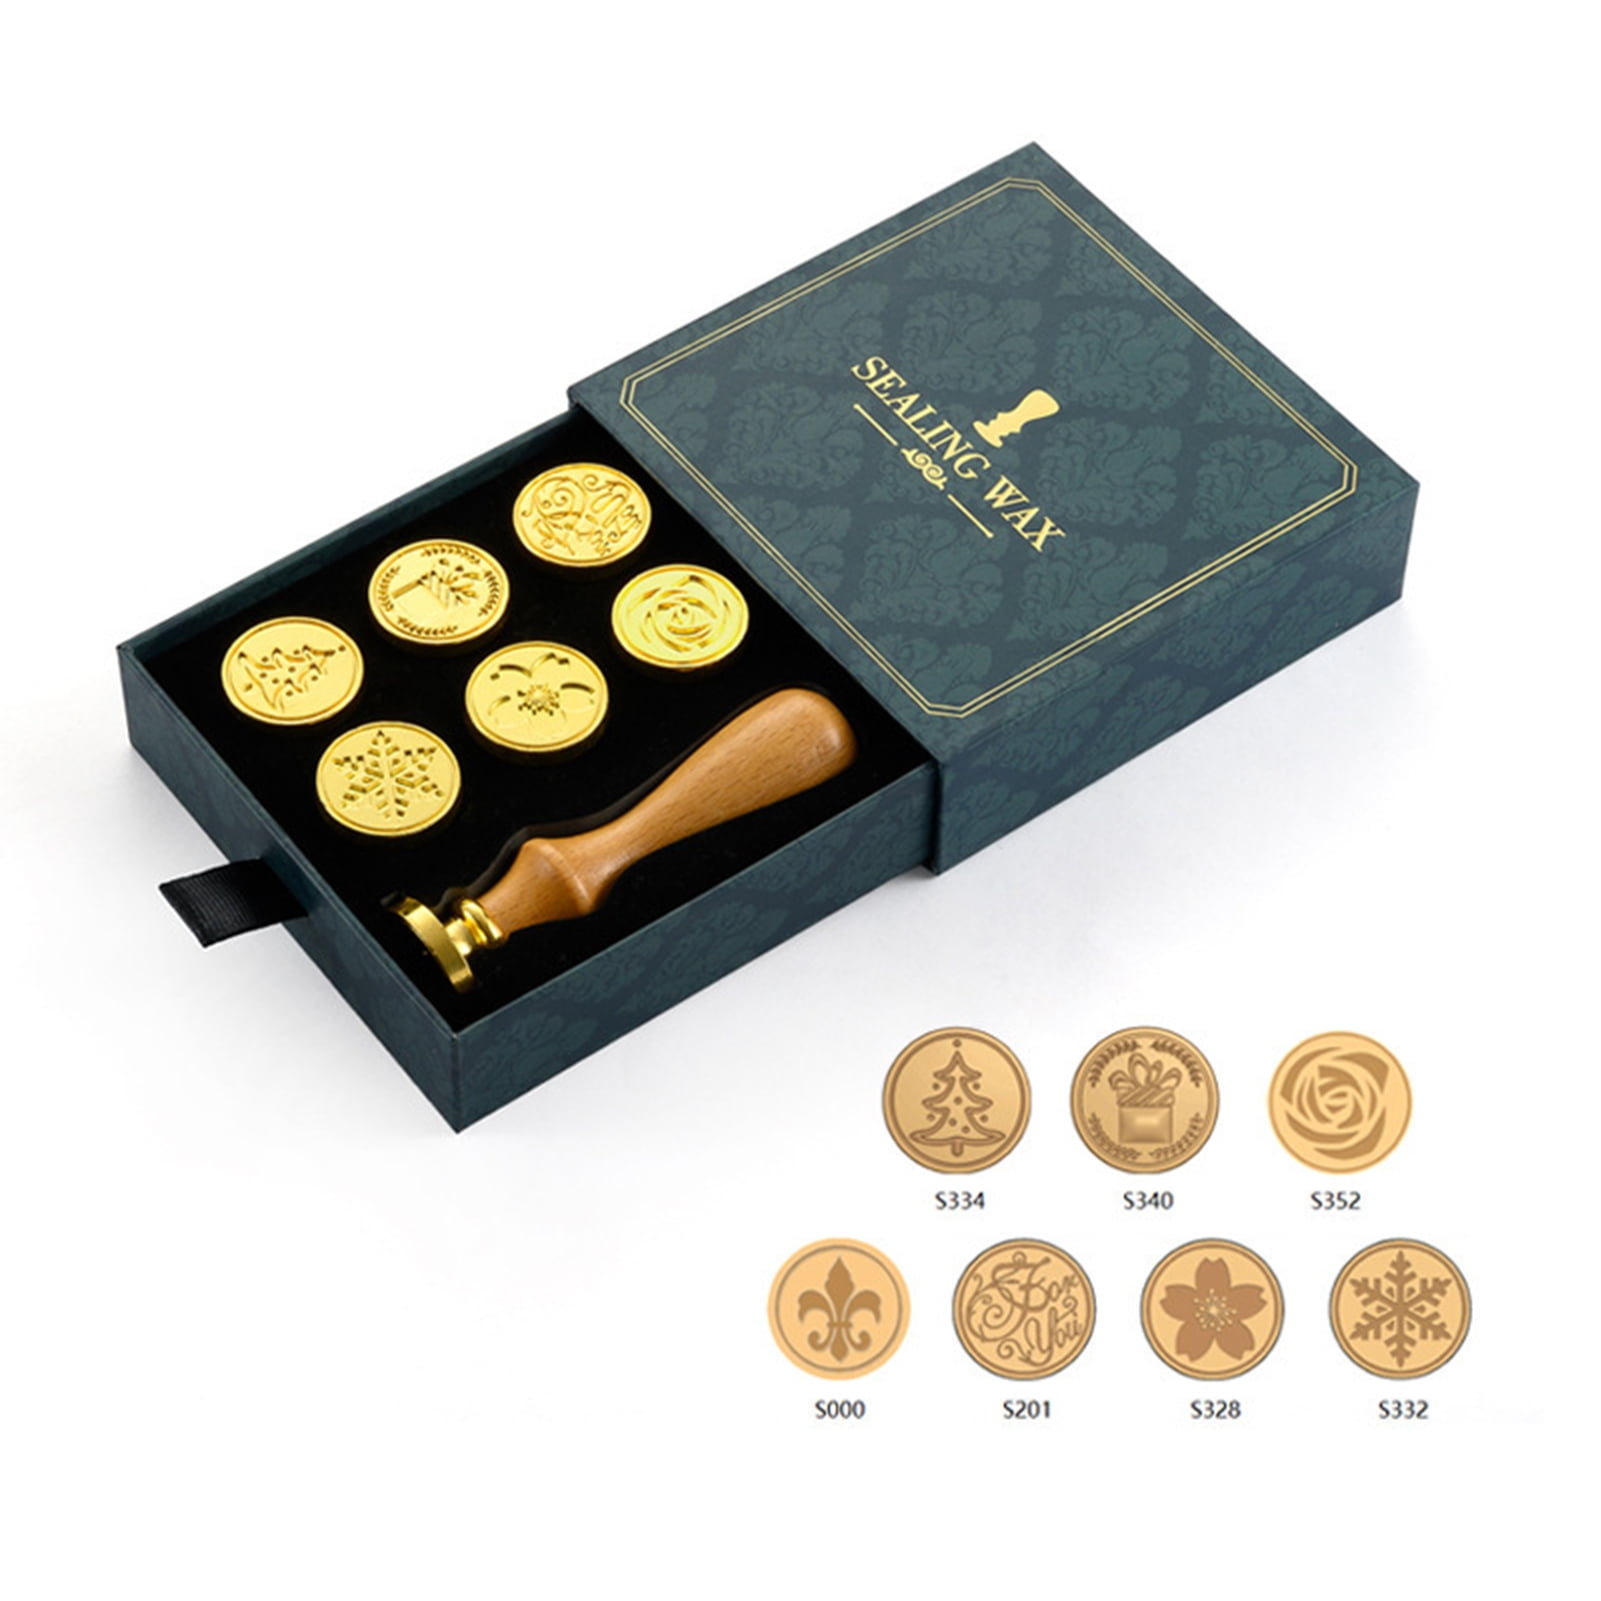 Wax Seal Stamp Kit Retro Vintage Sealing Wax Stamp Wooden Handle  Replaceable Stamp Head with Gift Box for Cards Envelopes Wedding  Invitations Postcard Gift Packaging 